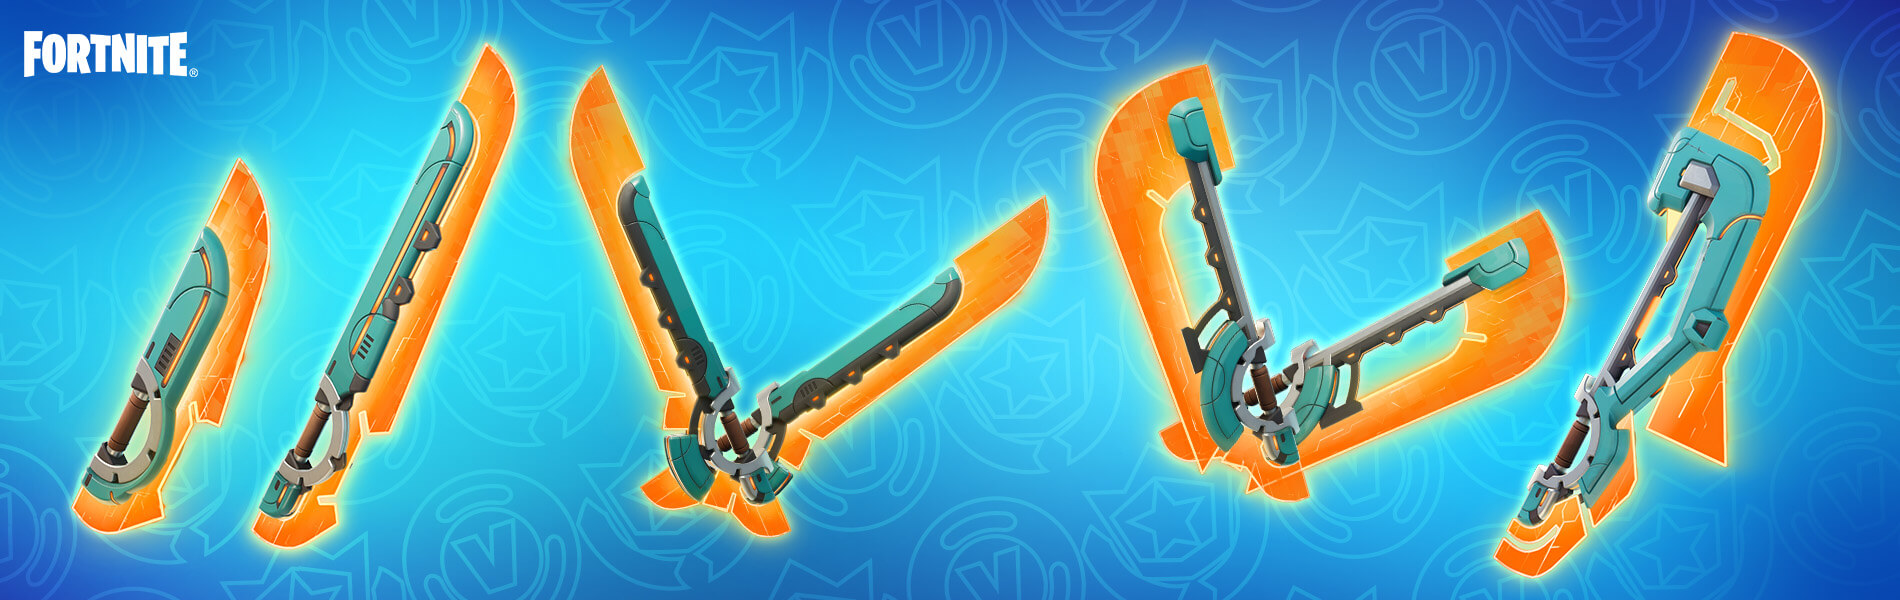 What's new in Fortnite April Crew Pack Release date, price, and more - Pickaxe